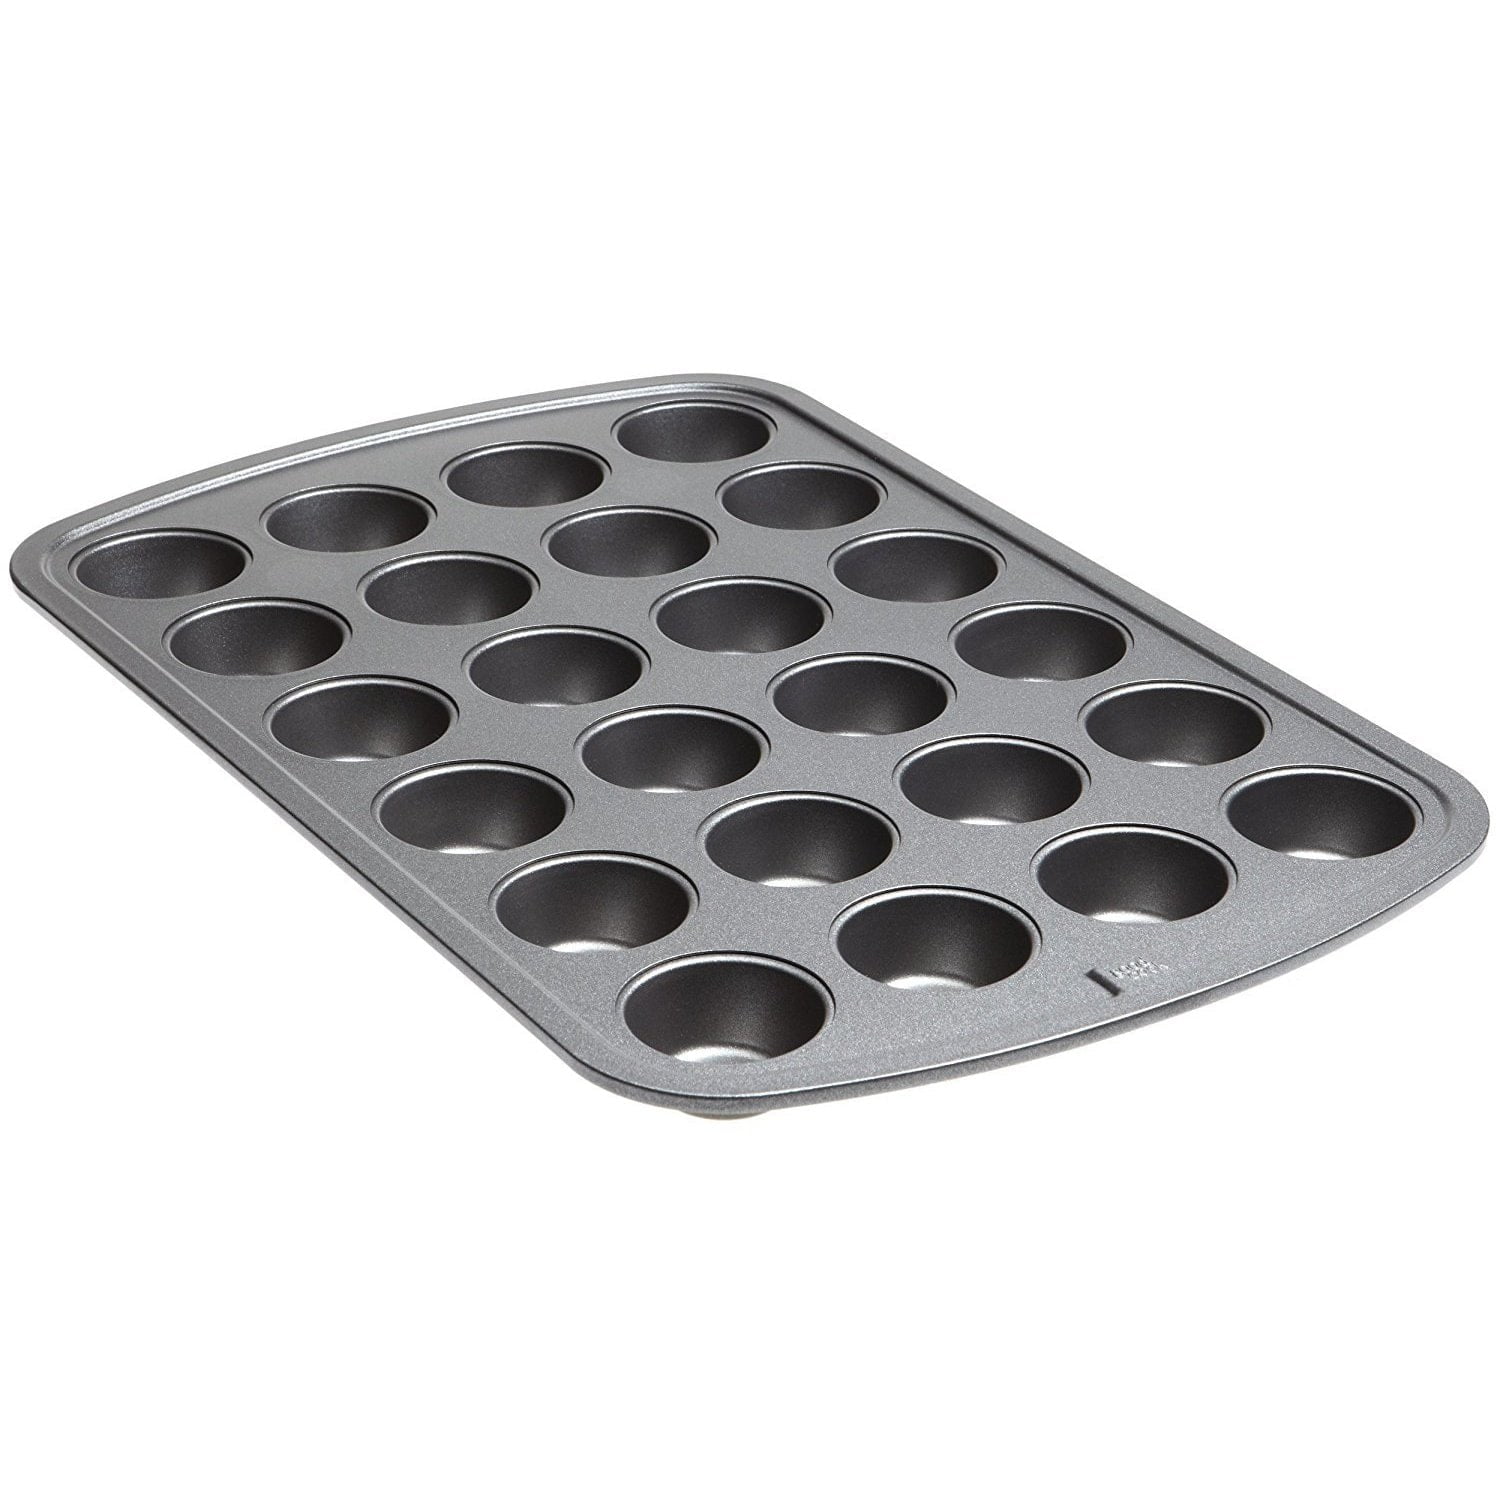 BakeEasy Mini Cupcake Pan Non Stick Carbon Steel Tray 12/24/48 Cups For  Muffins, Cupcakes, Tarts Perfect For 823 And More. From Cosmose, $12.56